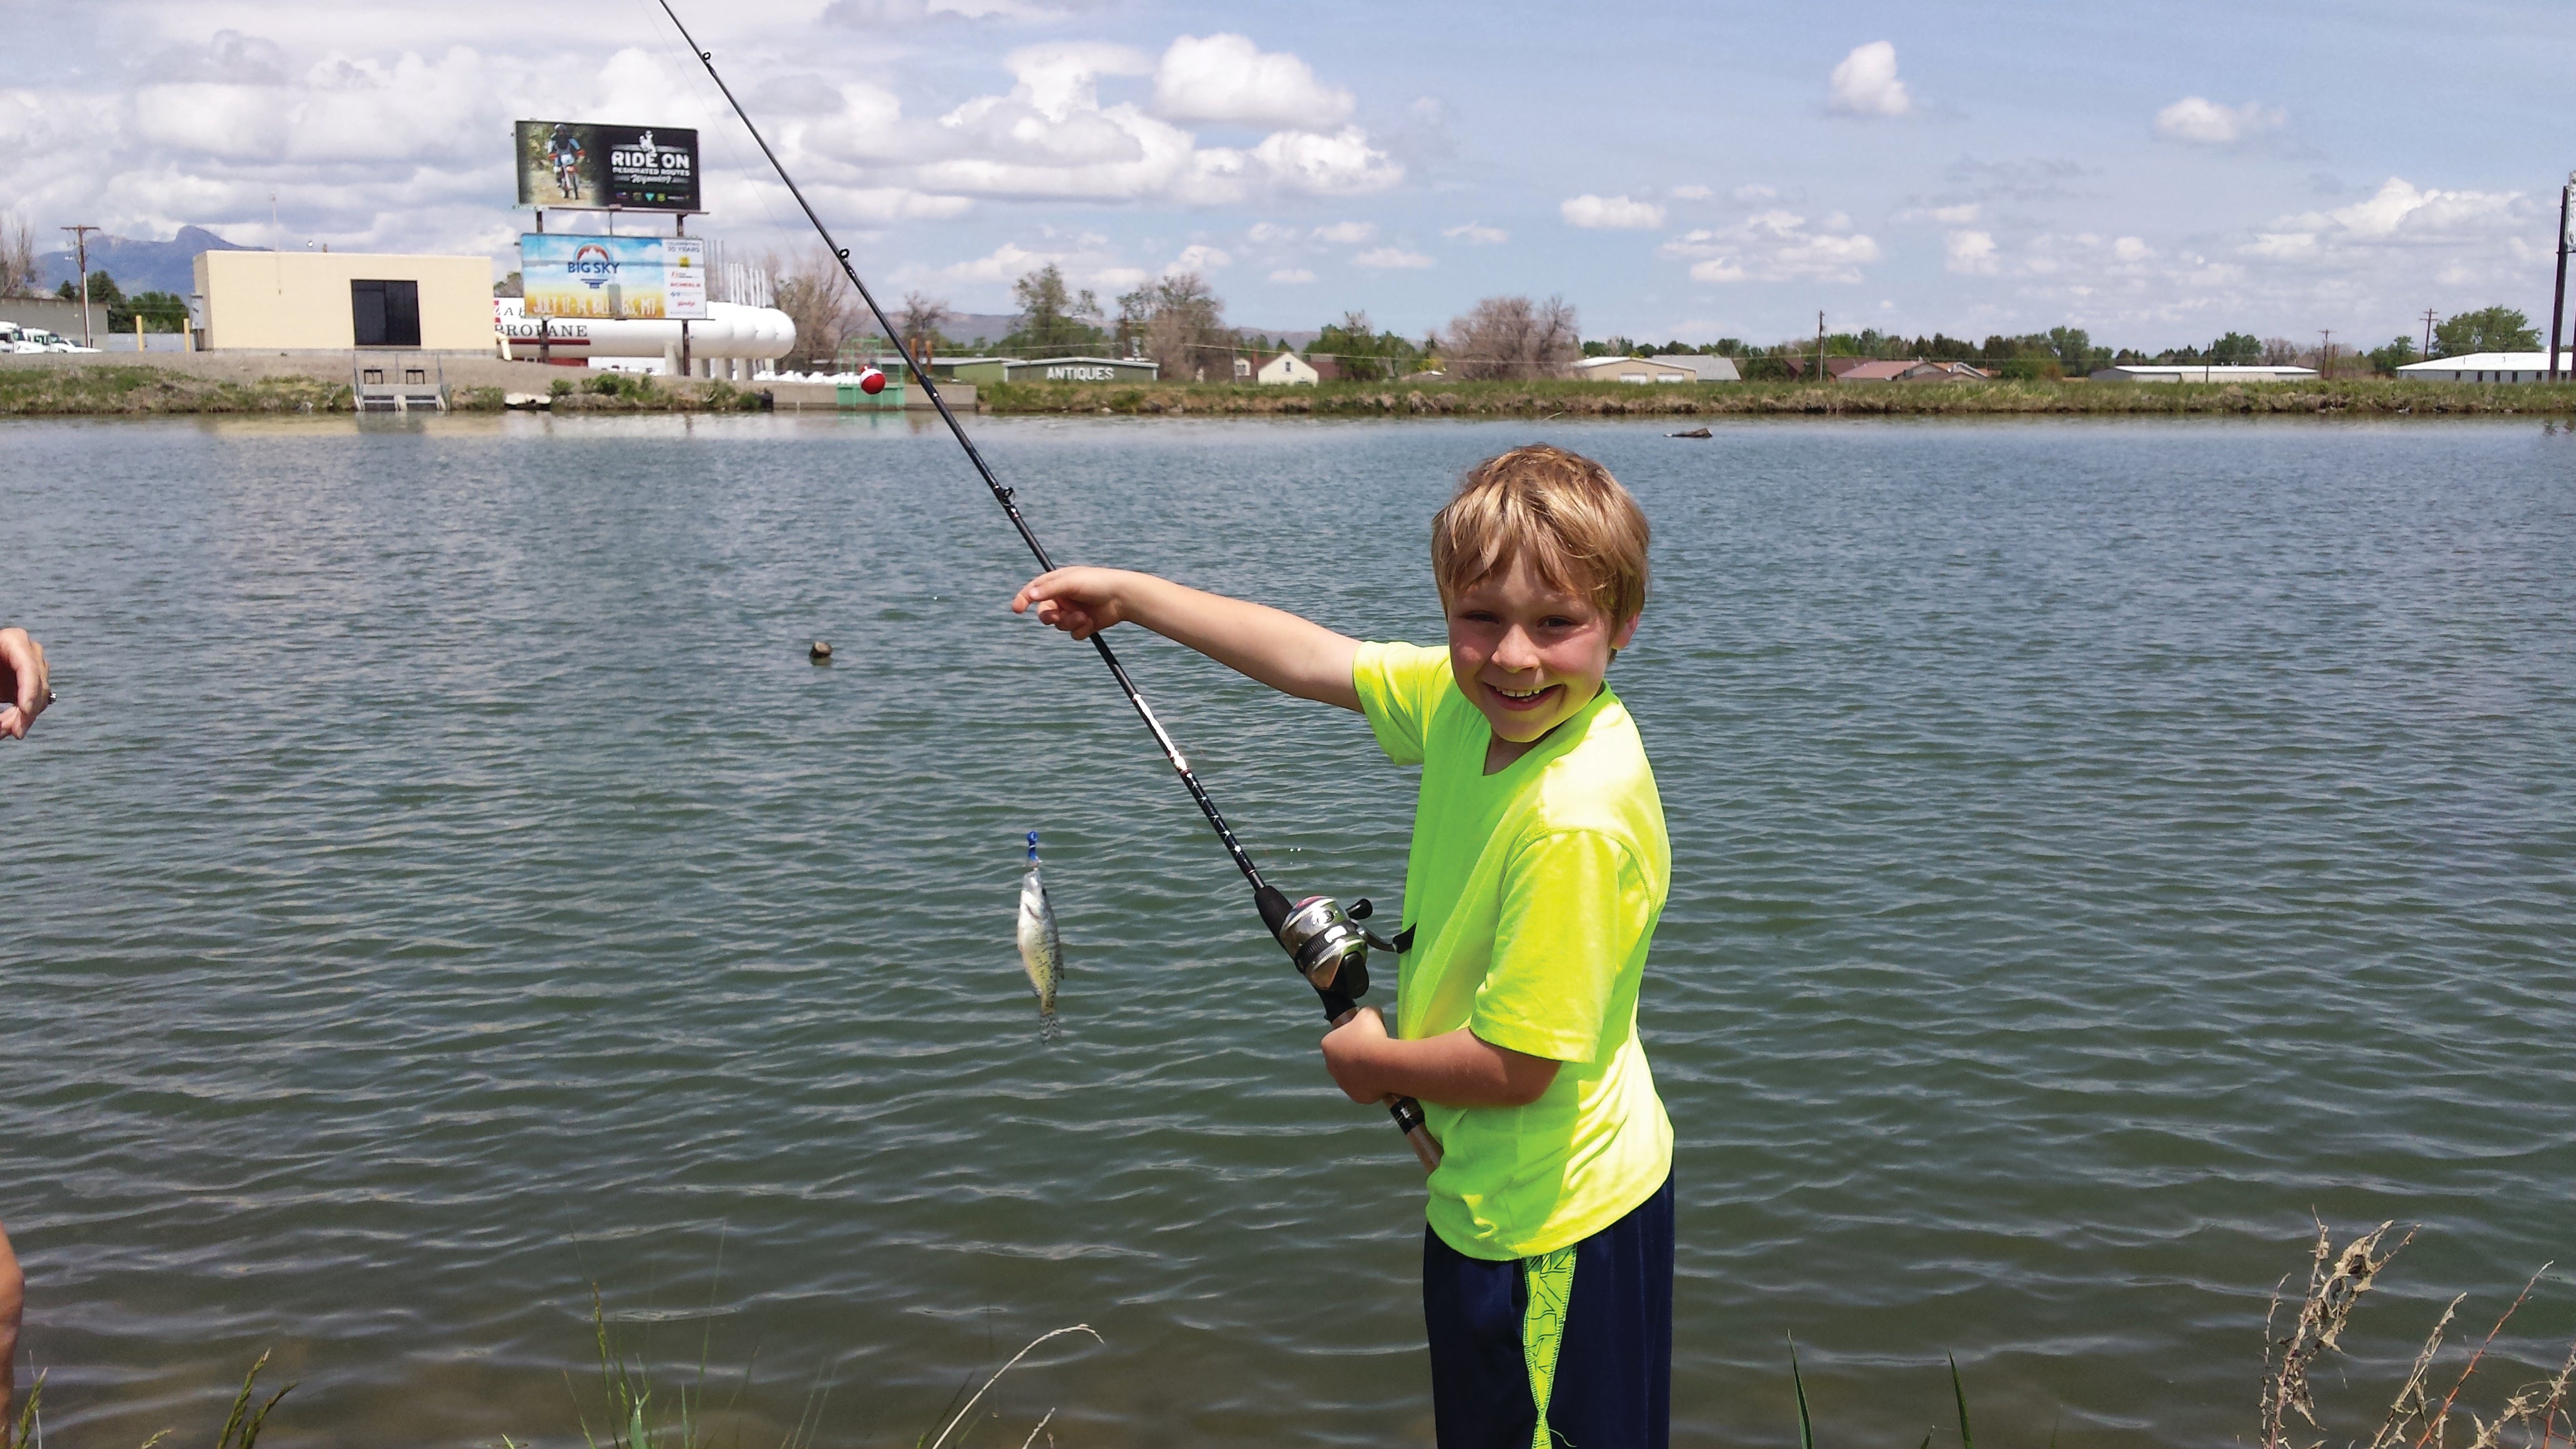 A young angler in a bright green shirt with a fishing rod shows off a fish on the end of his line.